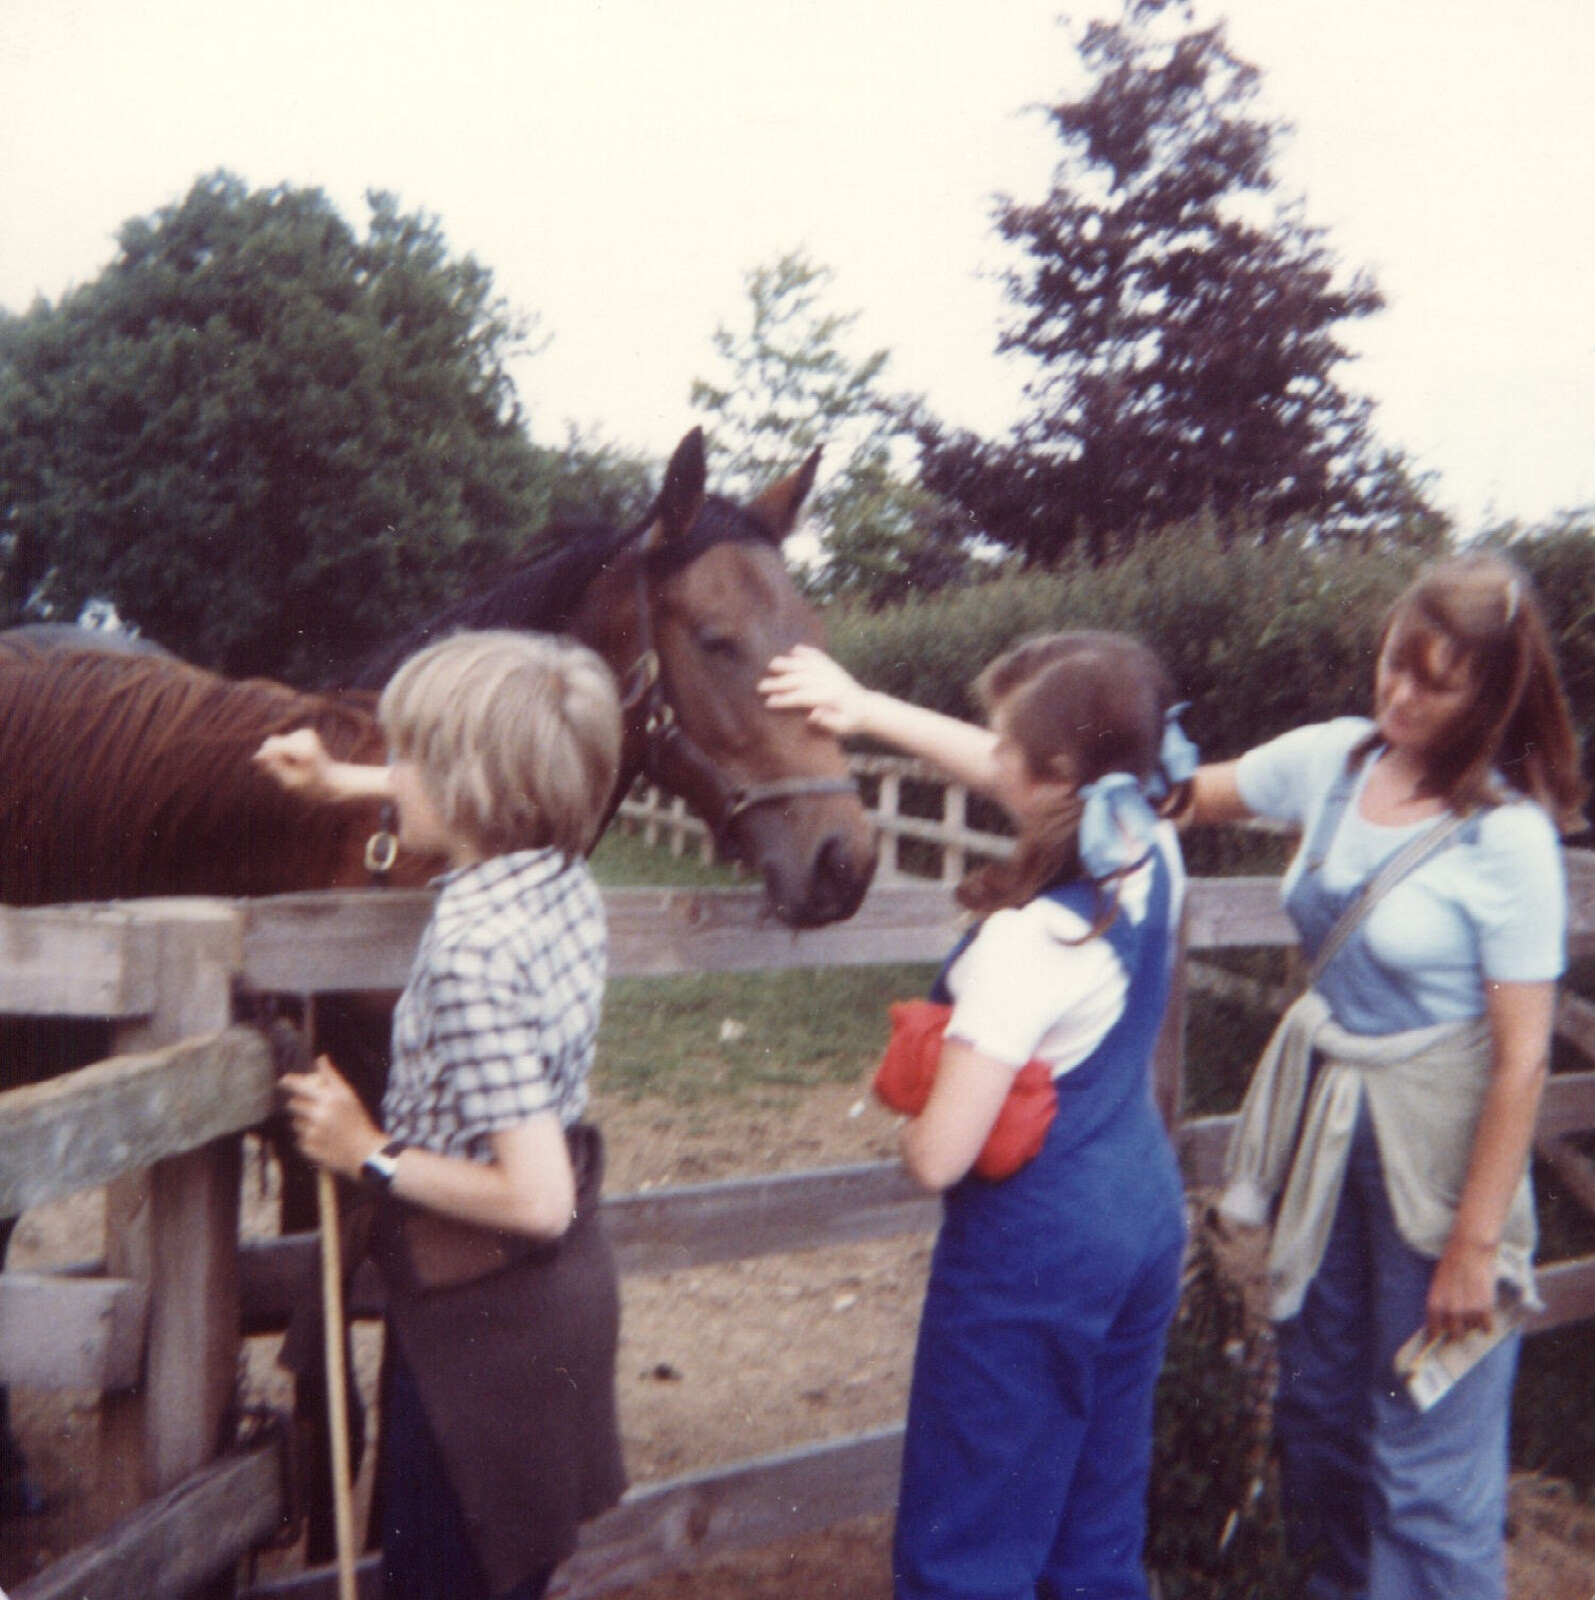 Family History: The 1980s - 24th January 2020: We visit some horses somewhere